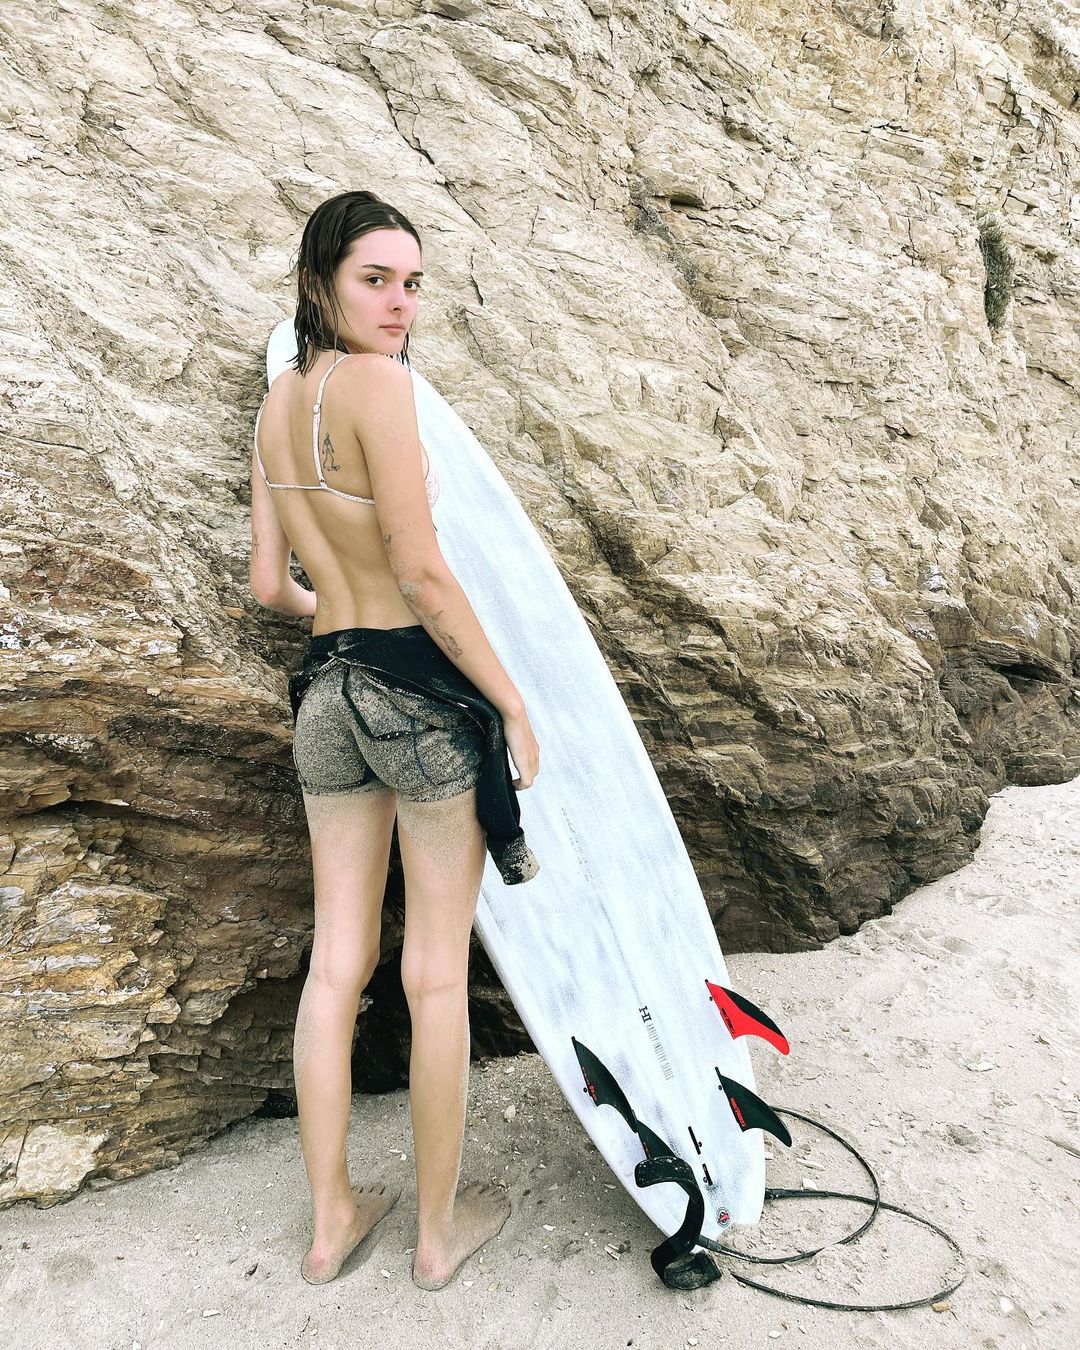 Photos n°6 : Charlotte Lawrence Wears the Viral Dress!